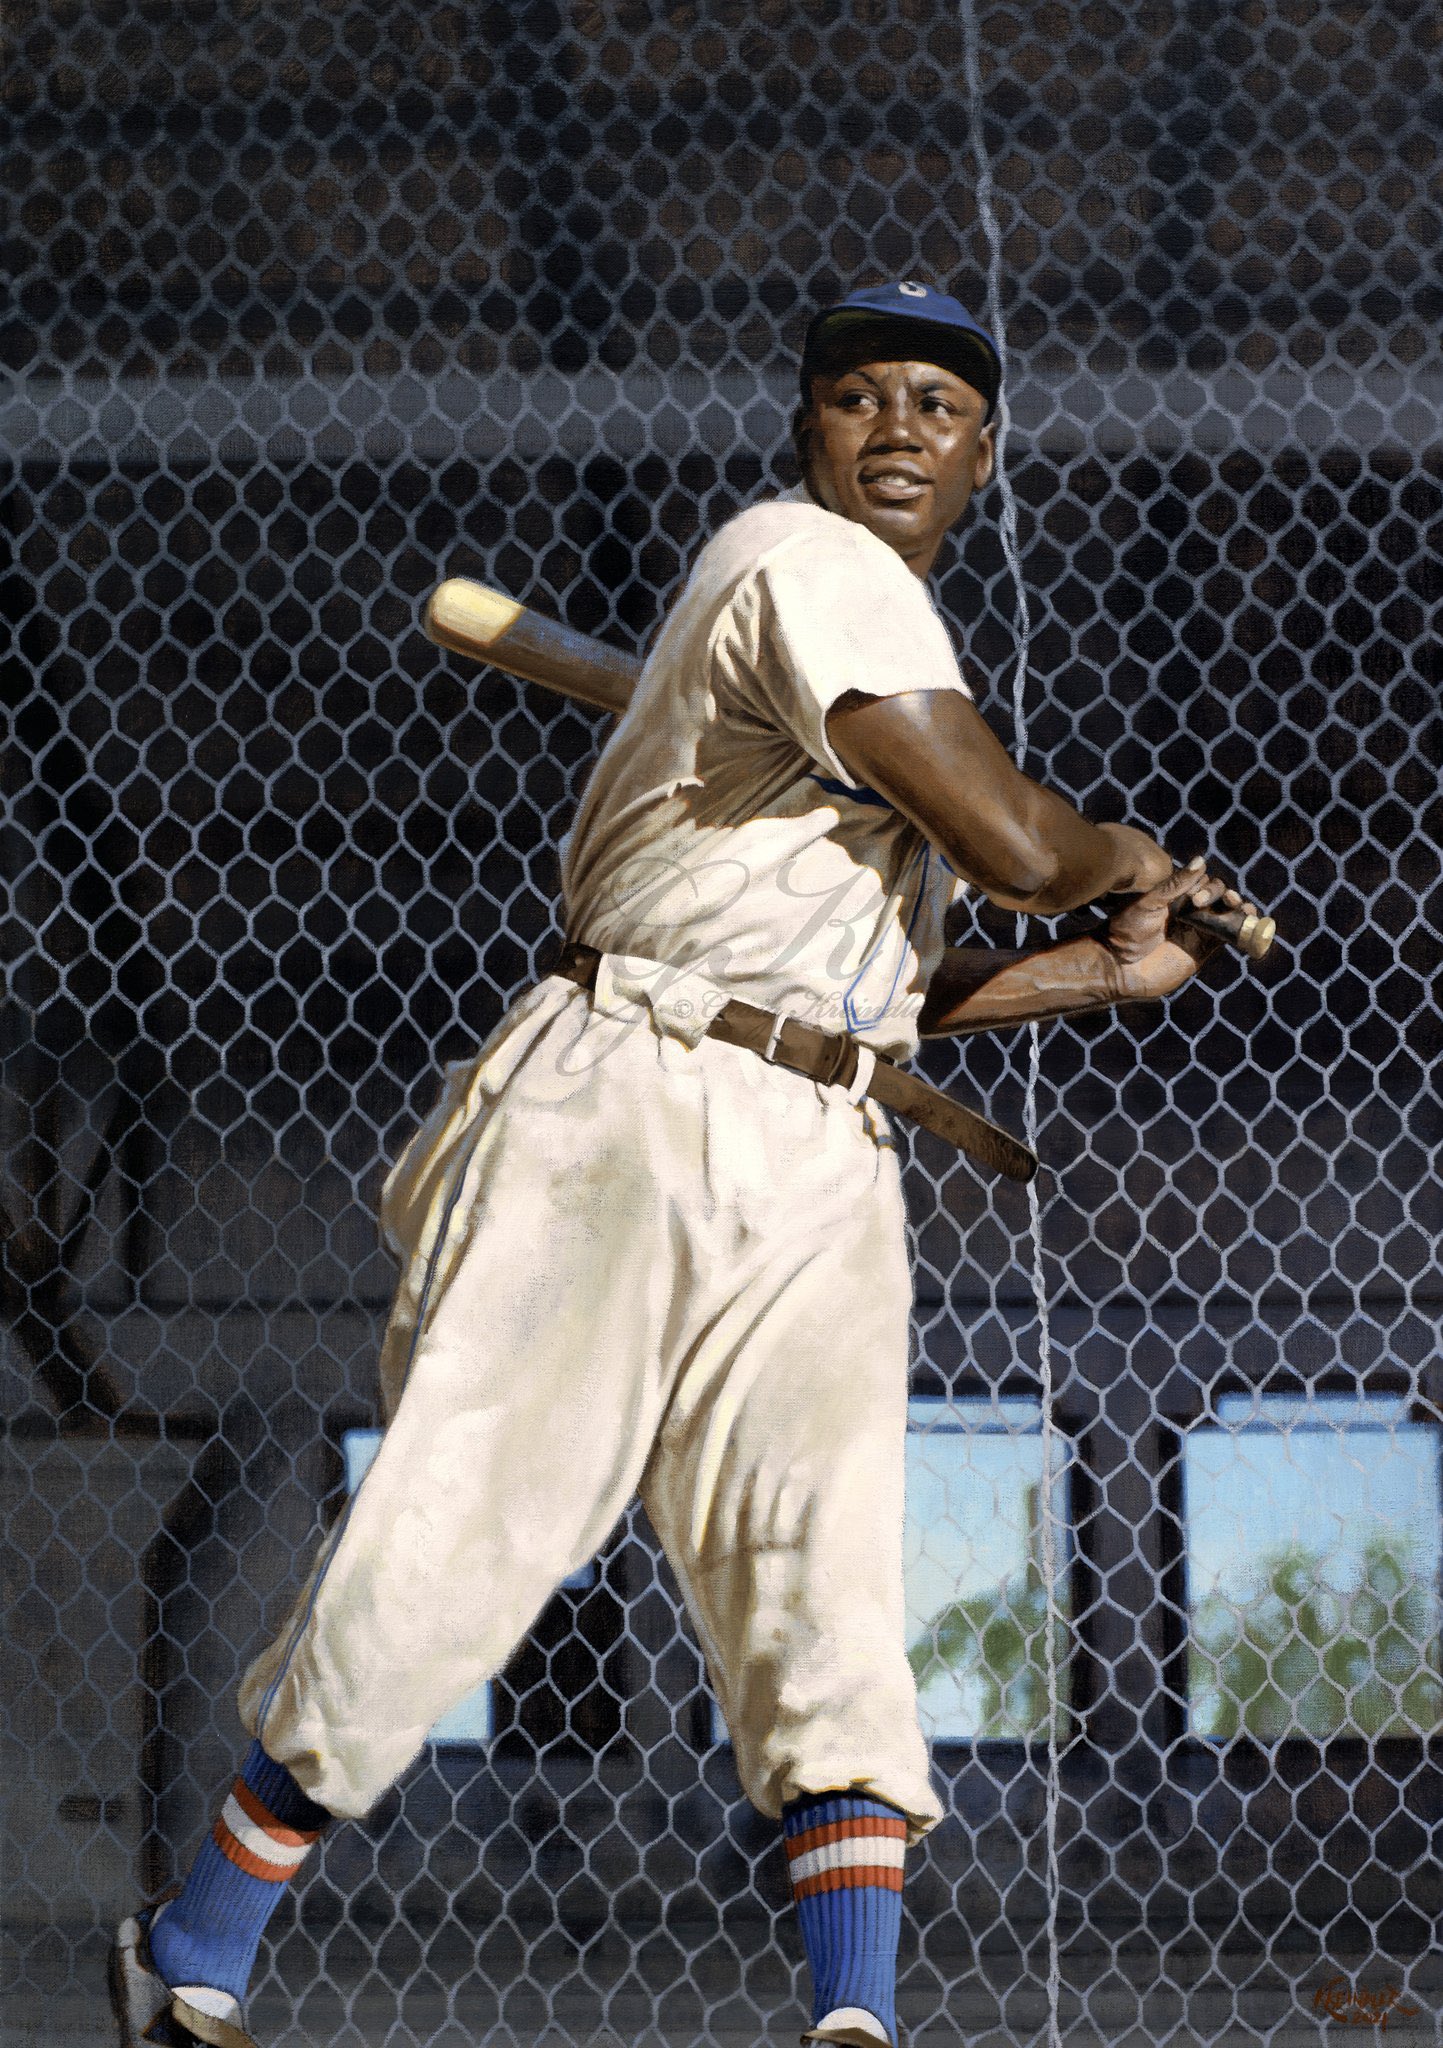 Graig Kreindler on X: Here's my painting of the great Josh Gibson